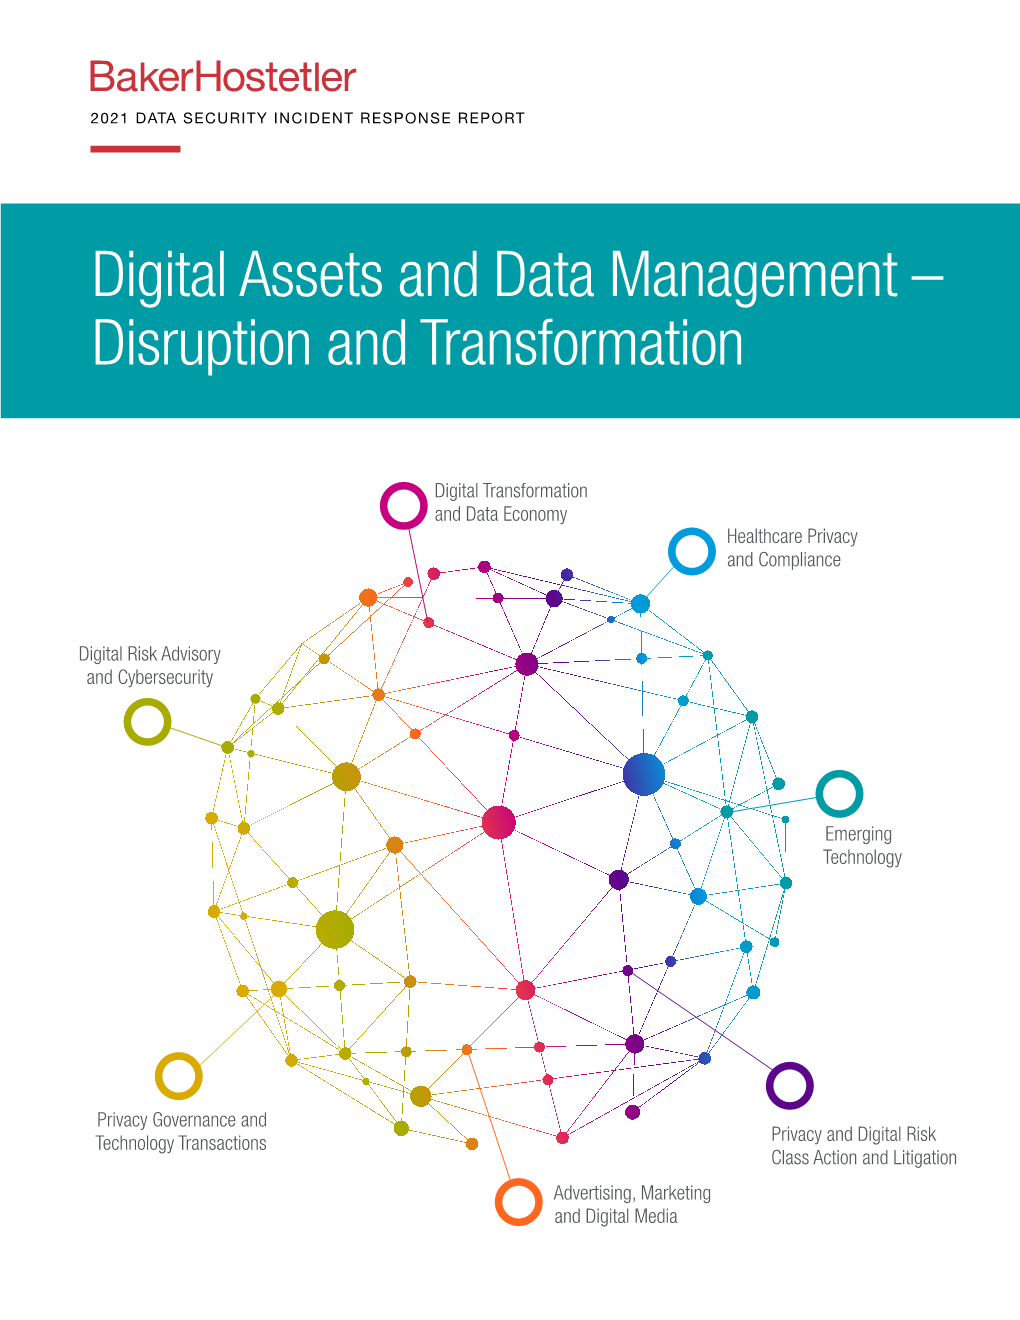 Digital Assets and Data Management – Disruption and Transformation